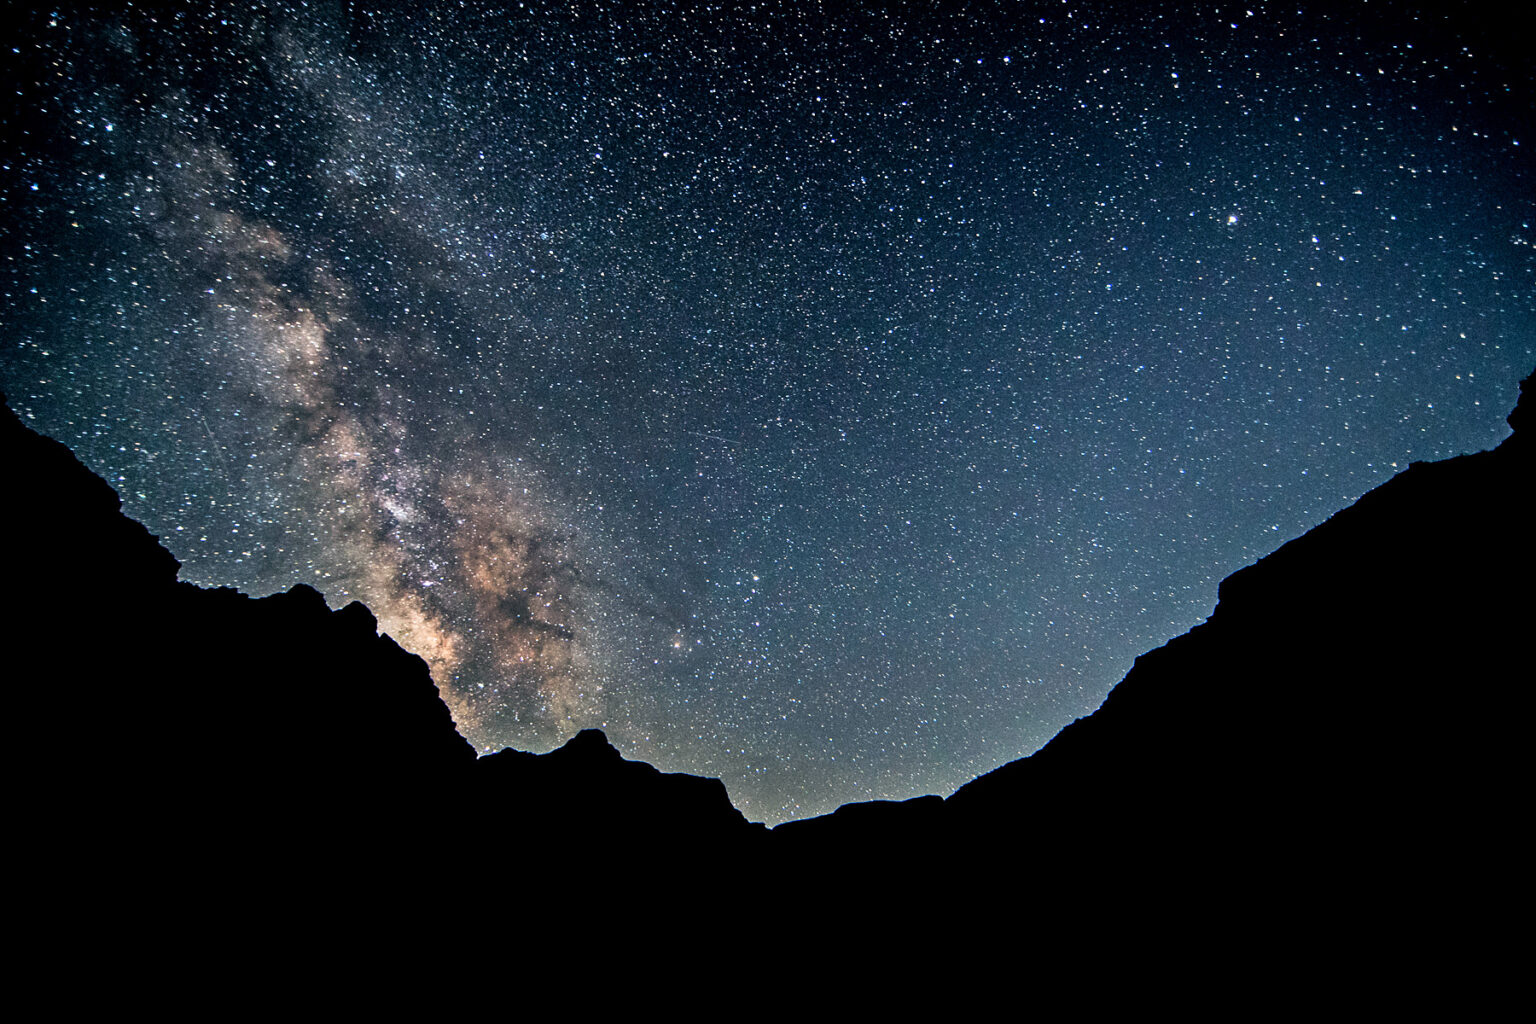 timed exposure of night sky above Grand Canyon with the Milky Way extremely pronounced